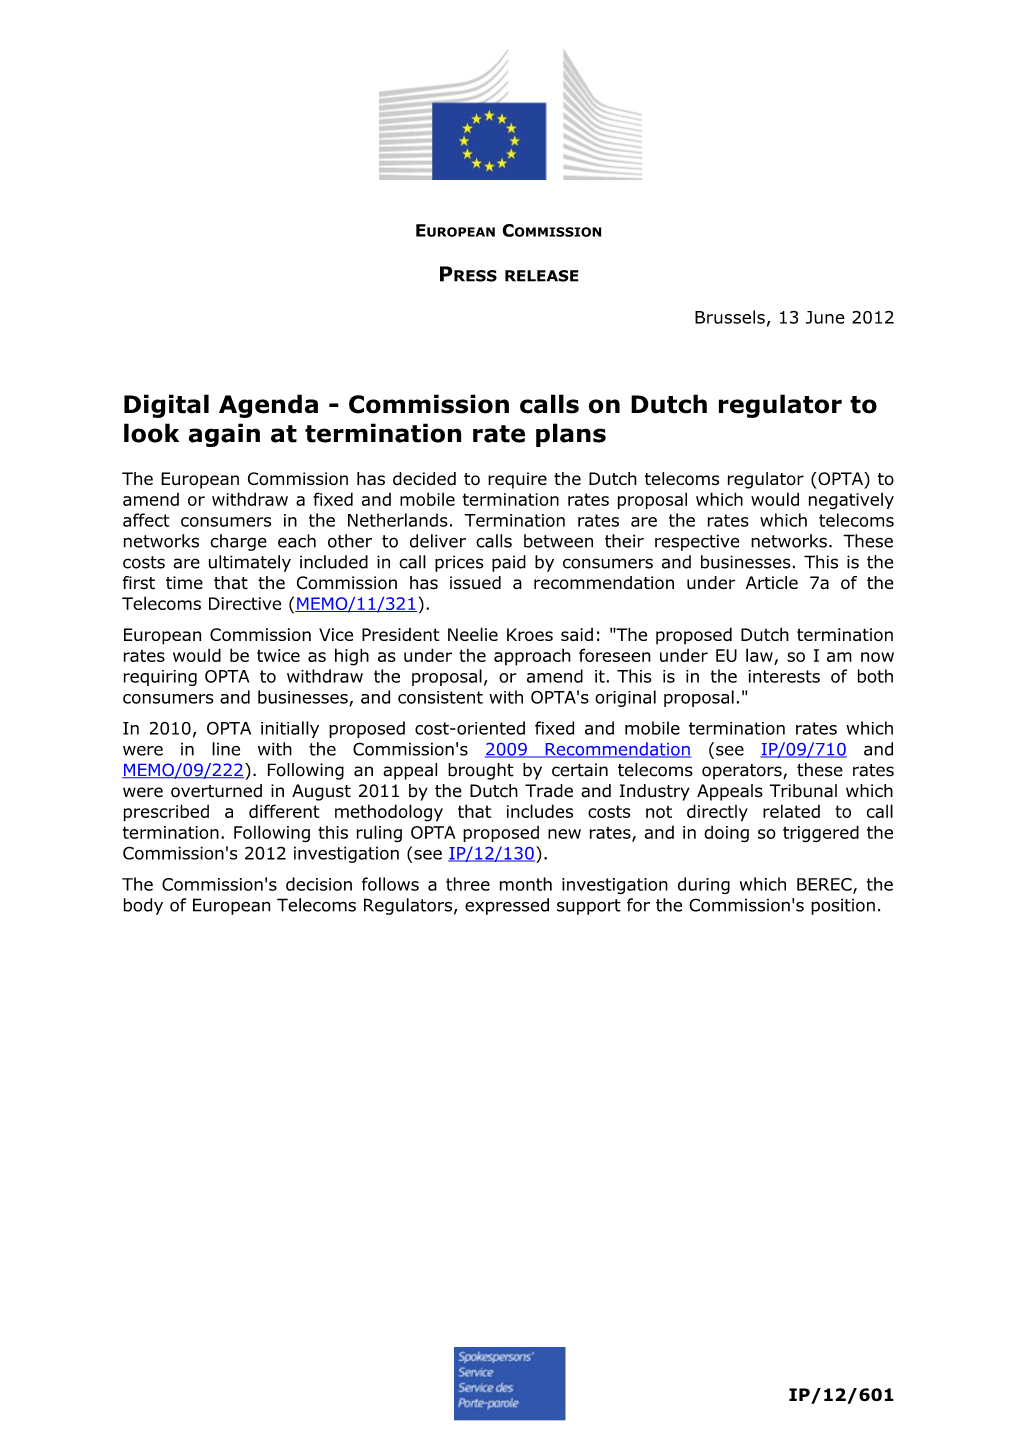 Digital Agenda - Commission Calls on Dutch Regulator to Look Again at Termination Rate Plans